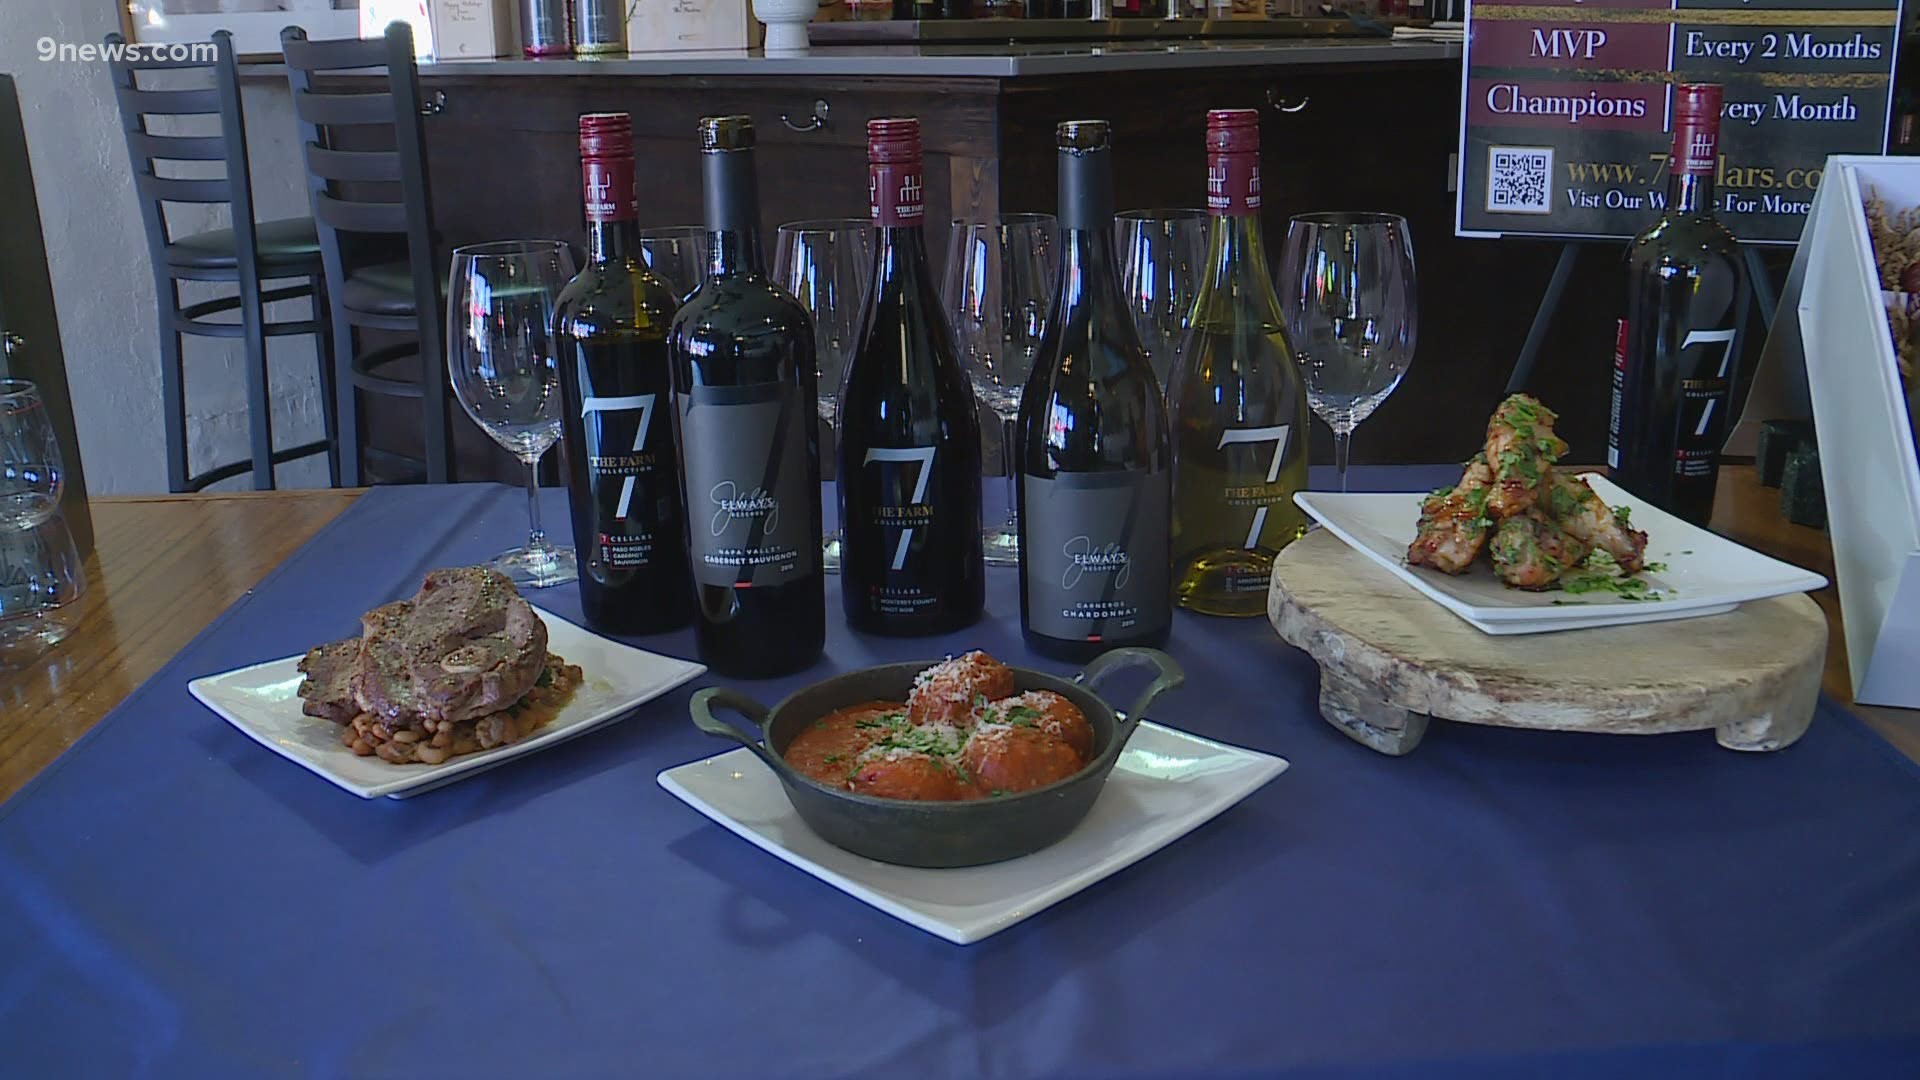 This week in The Feed, we're introducing you to a Denver-based company that's offering wine and food pairings from a renowned local chef.